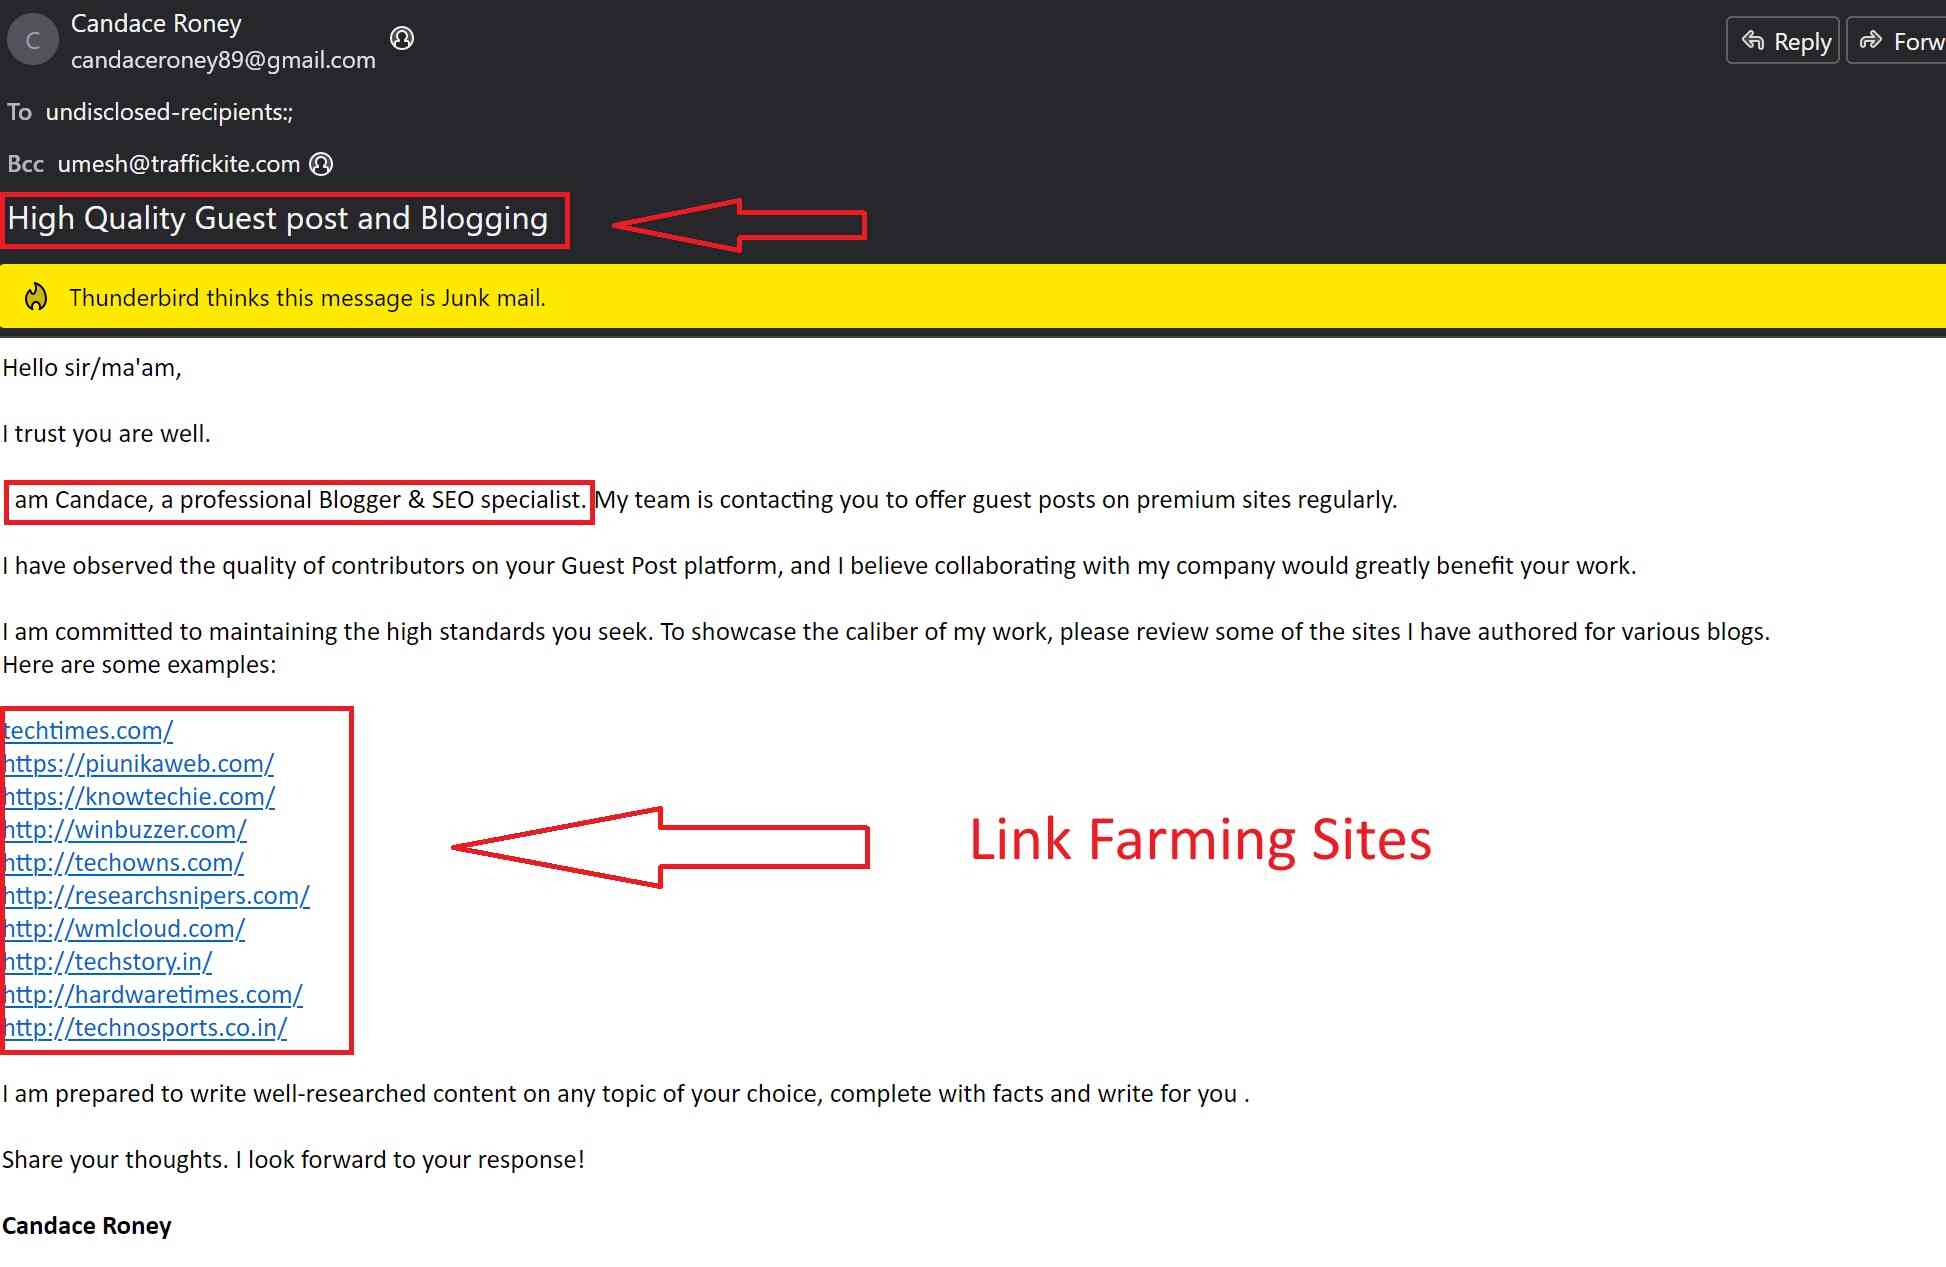 link farming sites email